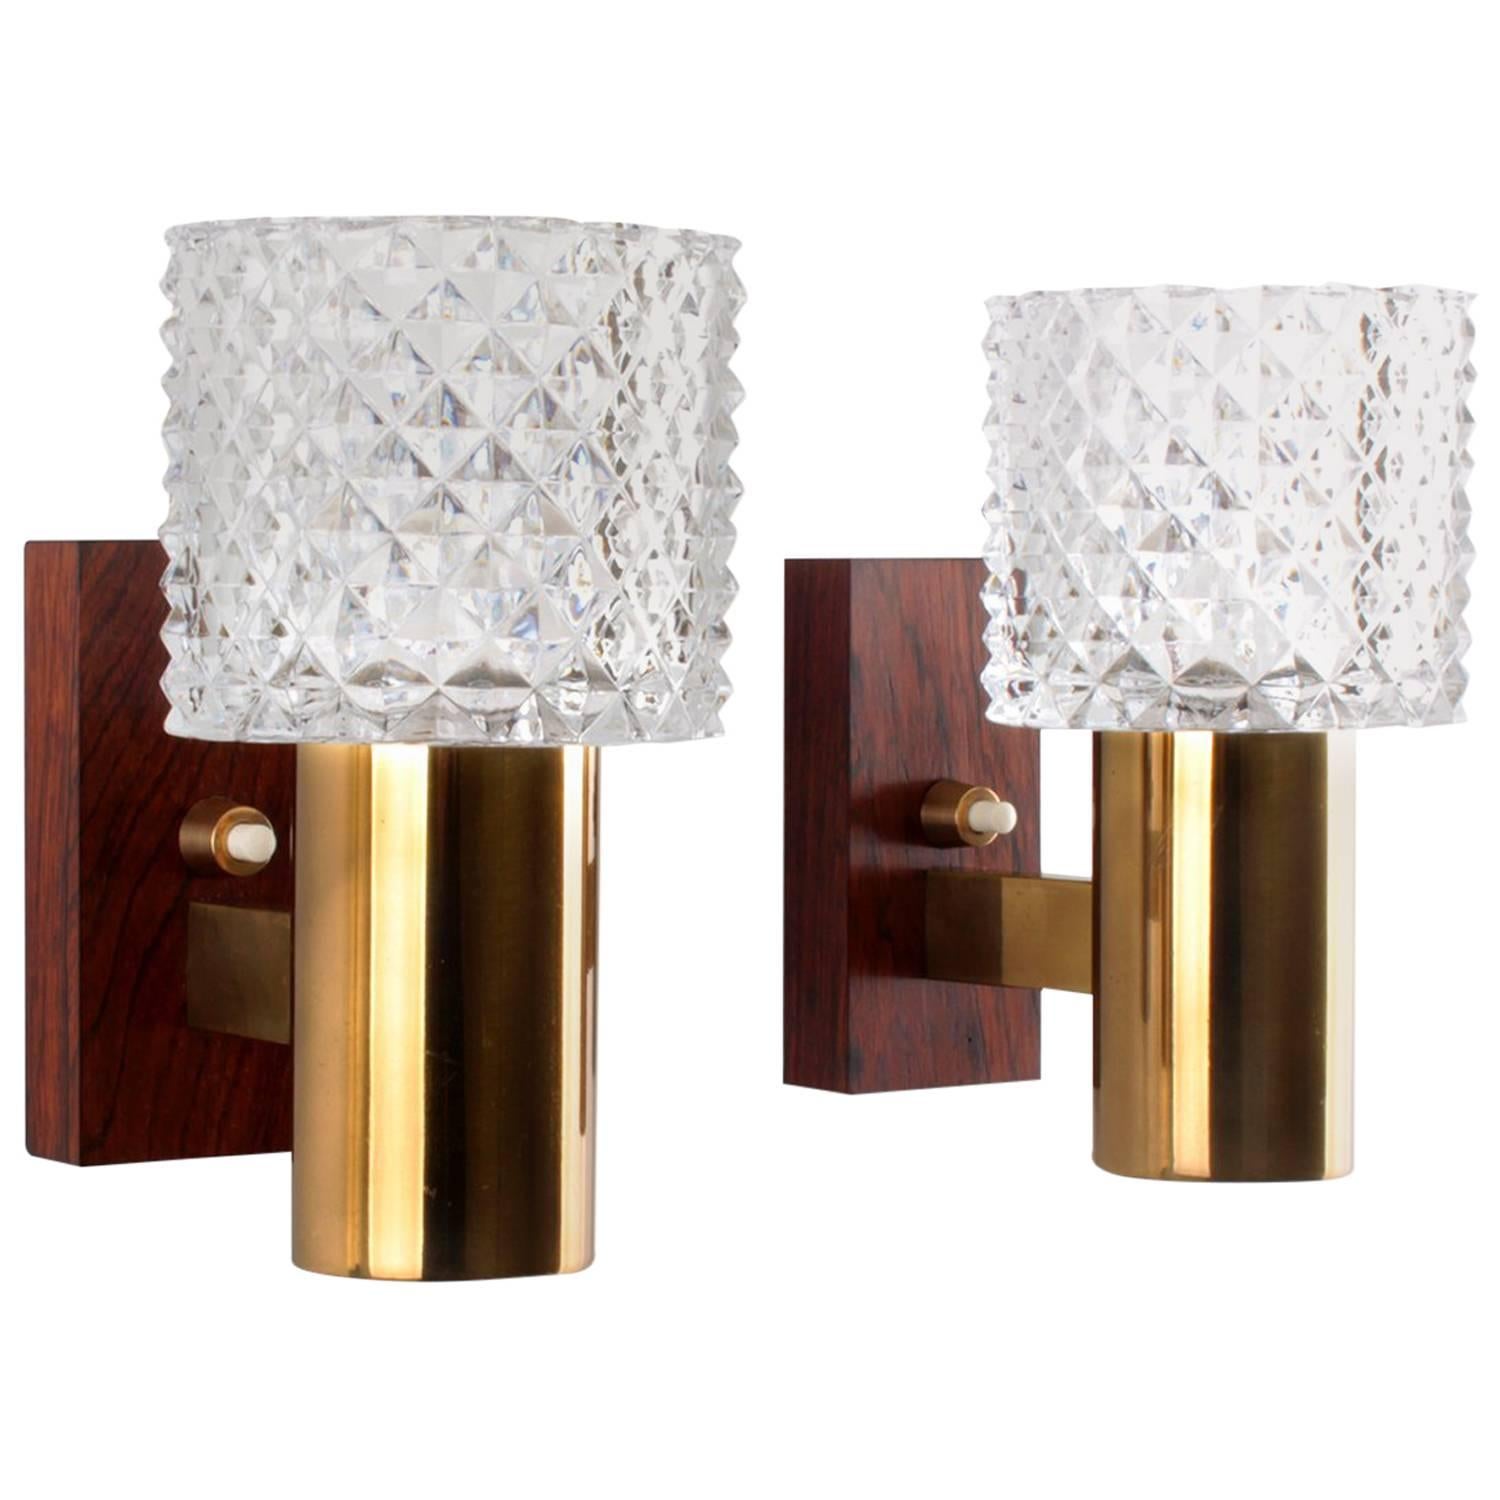 Crystal Glass and Rosewood Pair of Wall Sconces, 1960s Danish Lighting Design